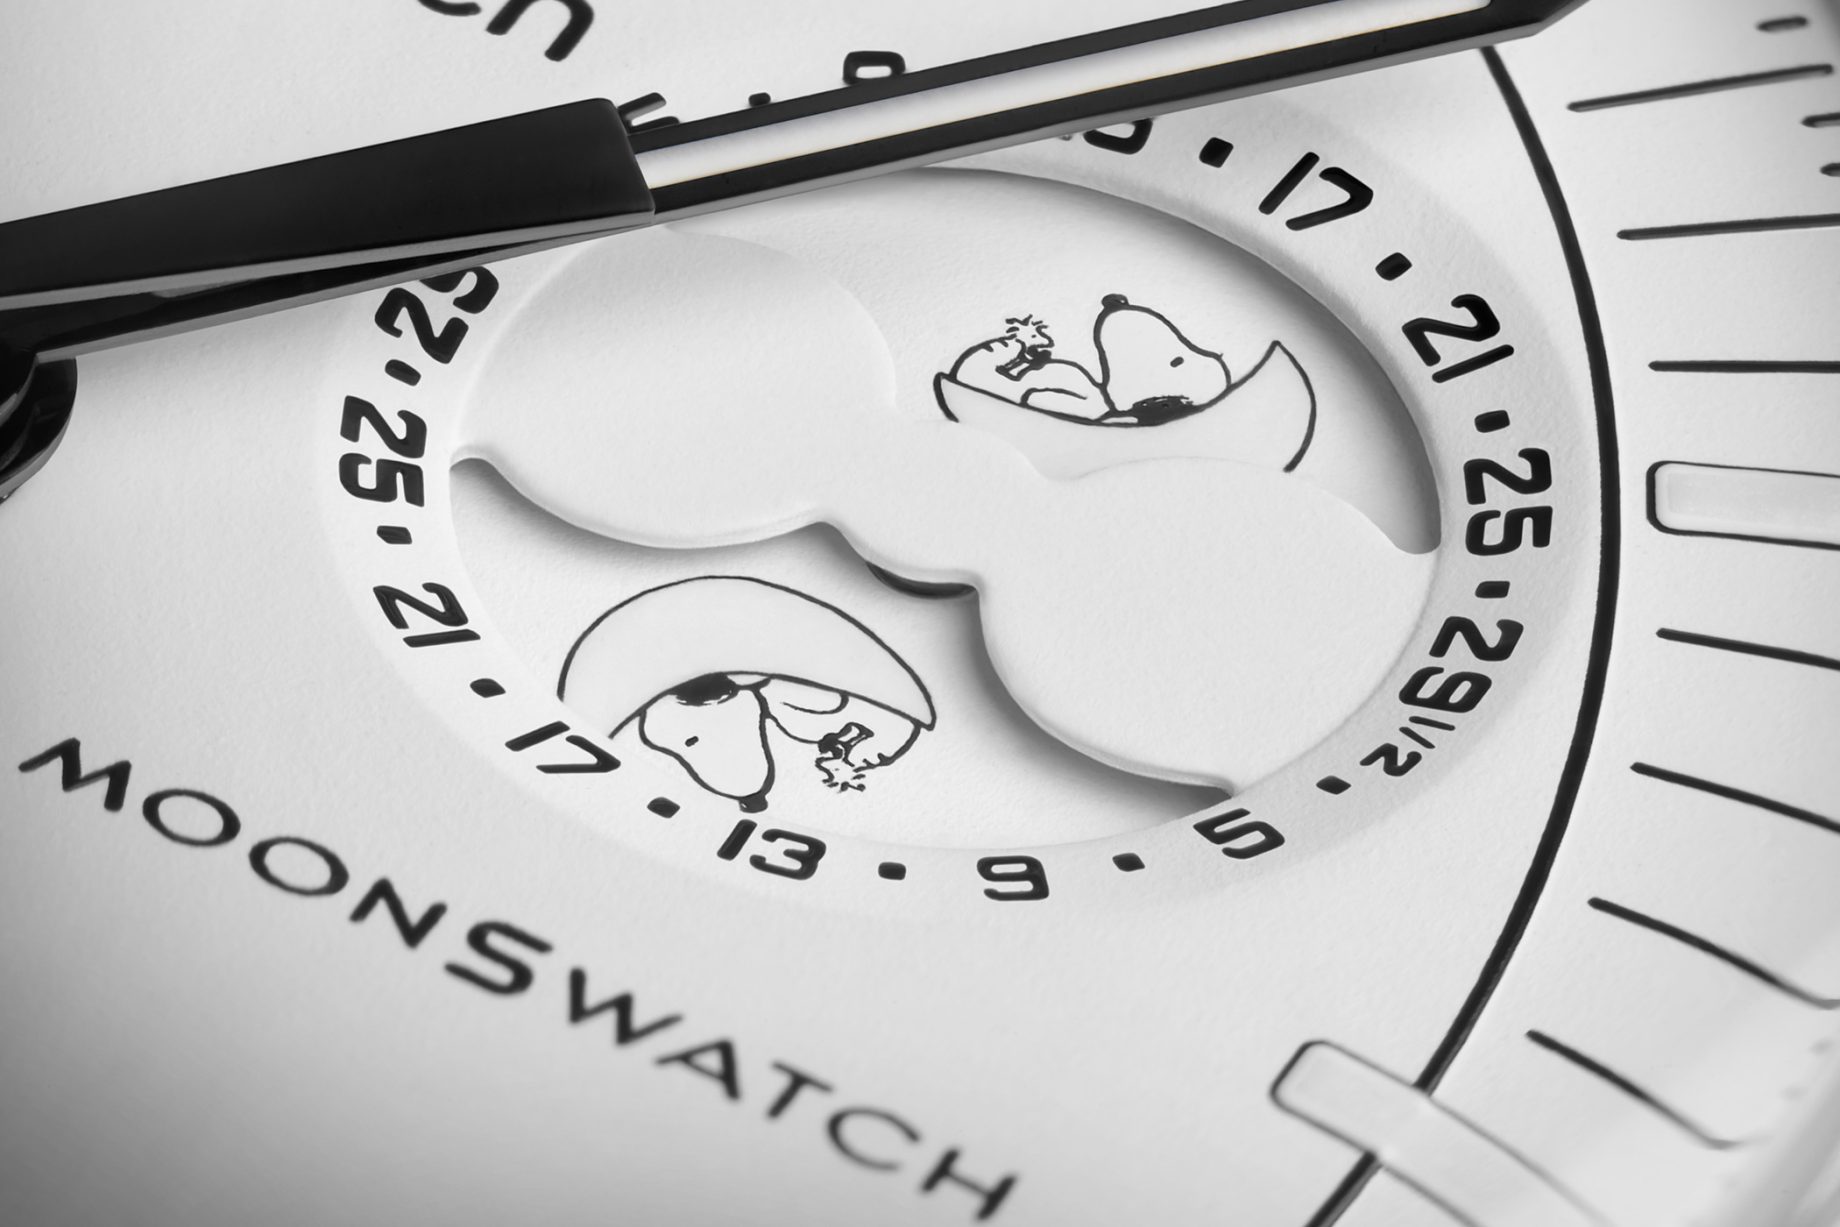 Omega x Swatch MoonSwatch Mission to the Moonphase